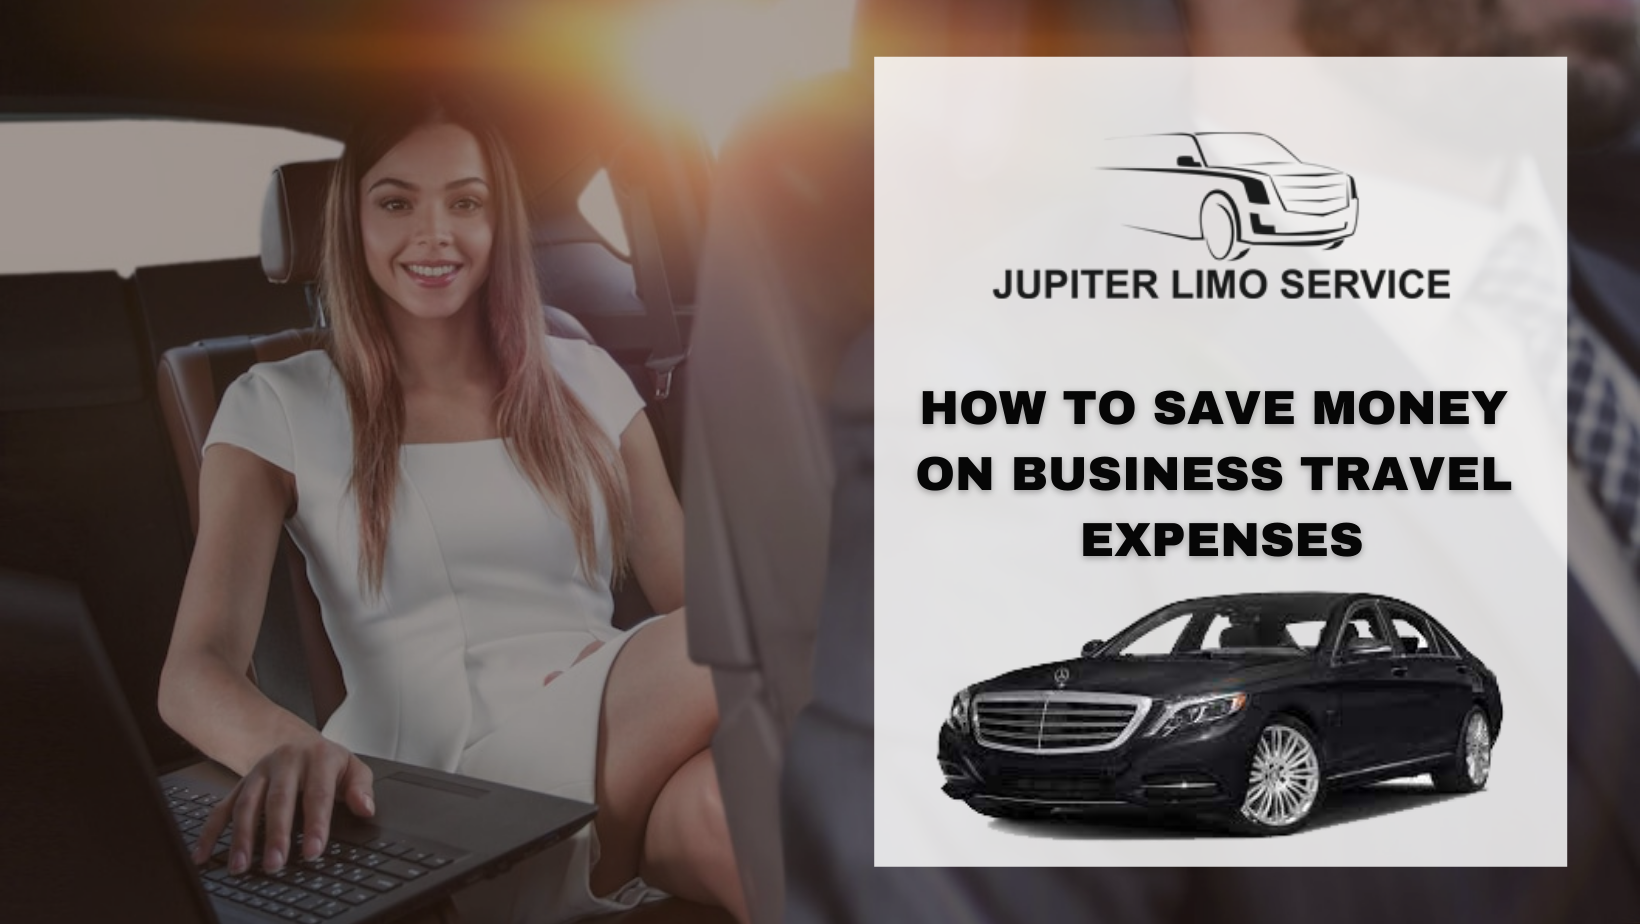 HOW TO SAVE MONEY ON BUSINESS TRAVEL EXPENSES